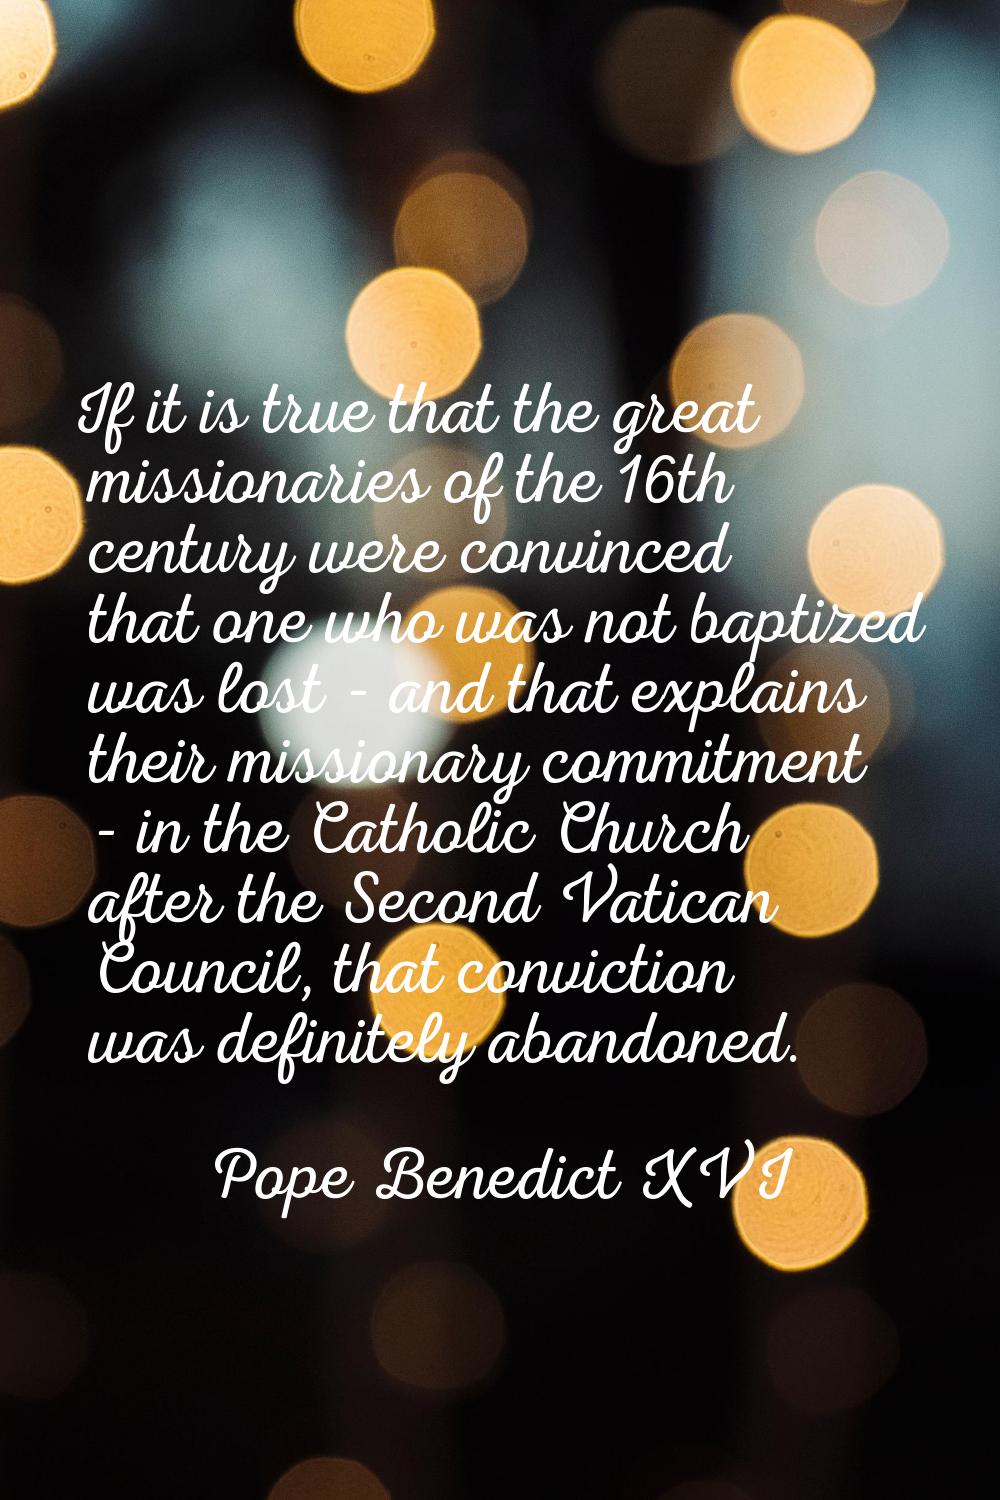 If it is true that the great missionaries of the 16th century were convinced that one who was not b